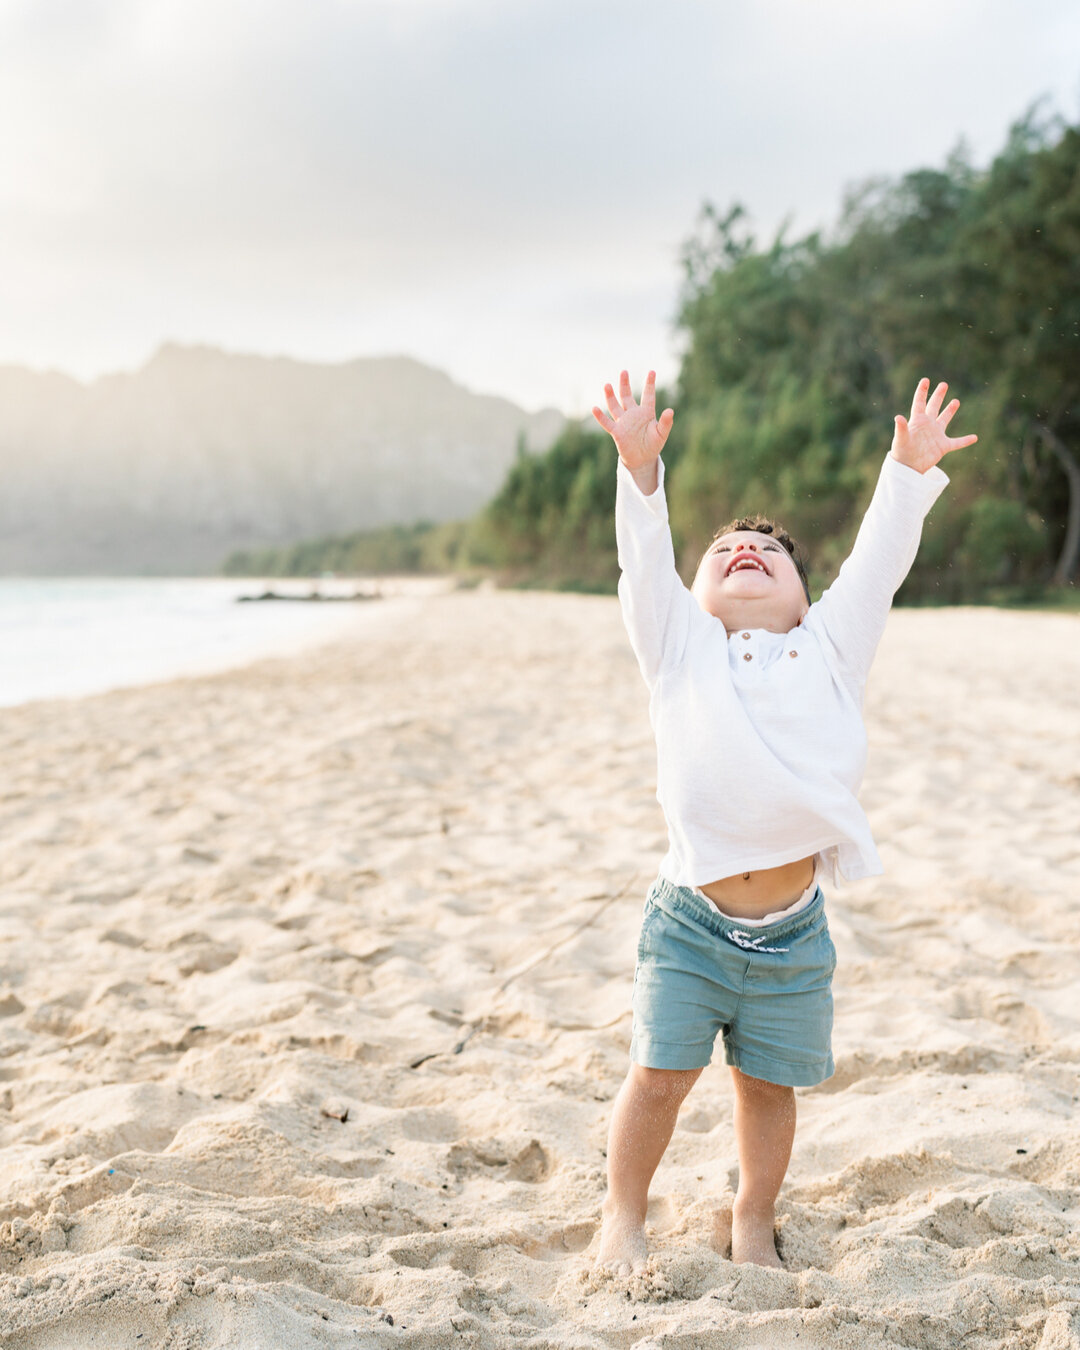 This was the second time photographing this trio - the first was for little Koa's first birthday.  I love that these parents just go with the flow with Koa and let him be himself.  This little guy LOVES the beach - and after this sunrise session, the